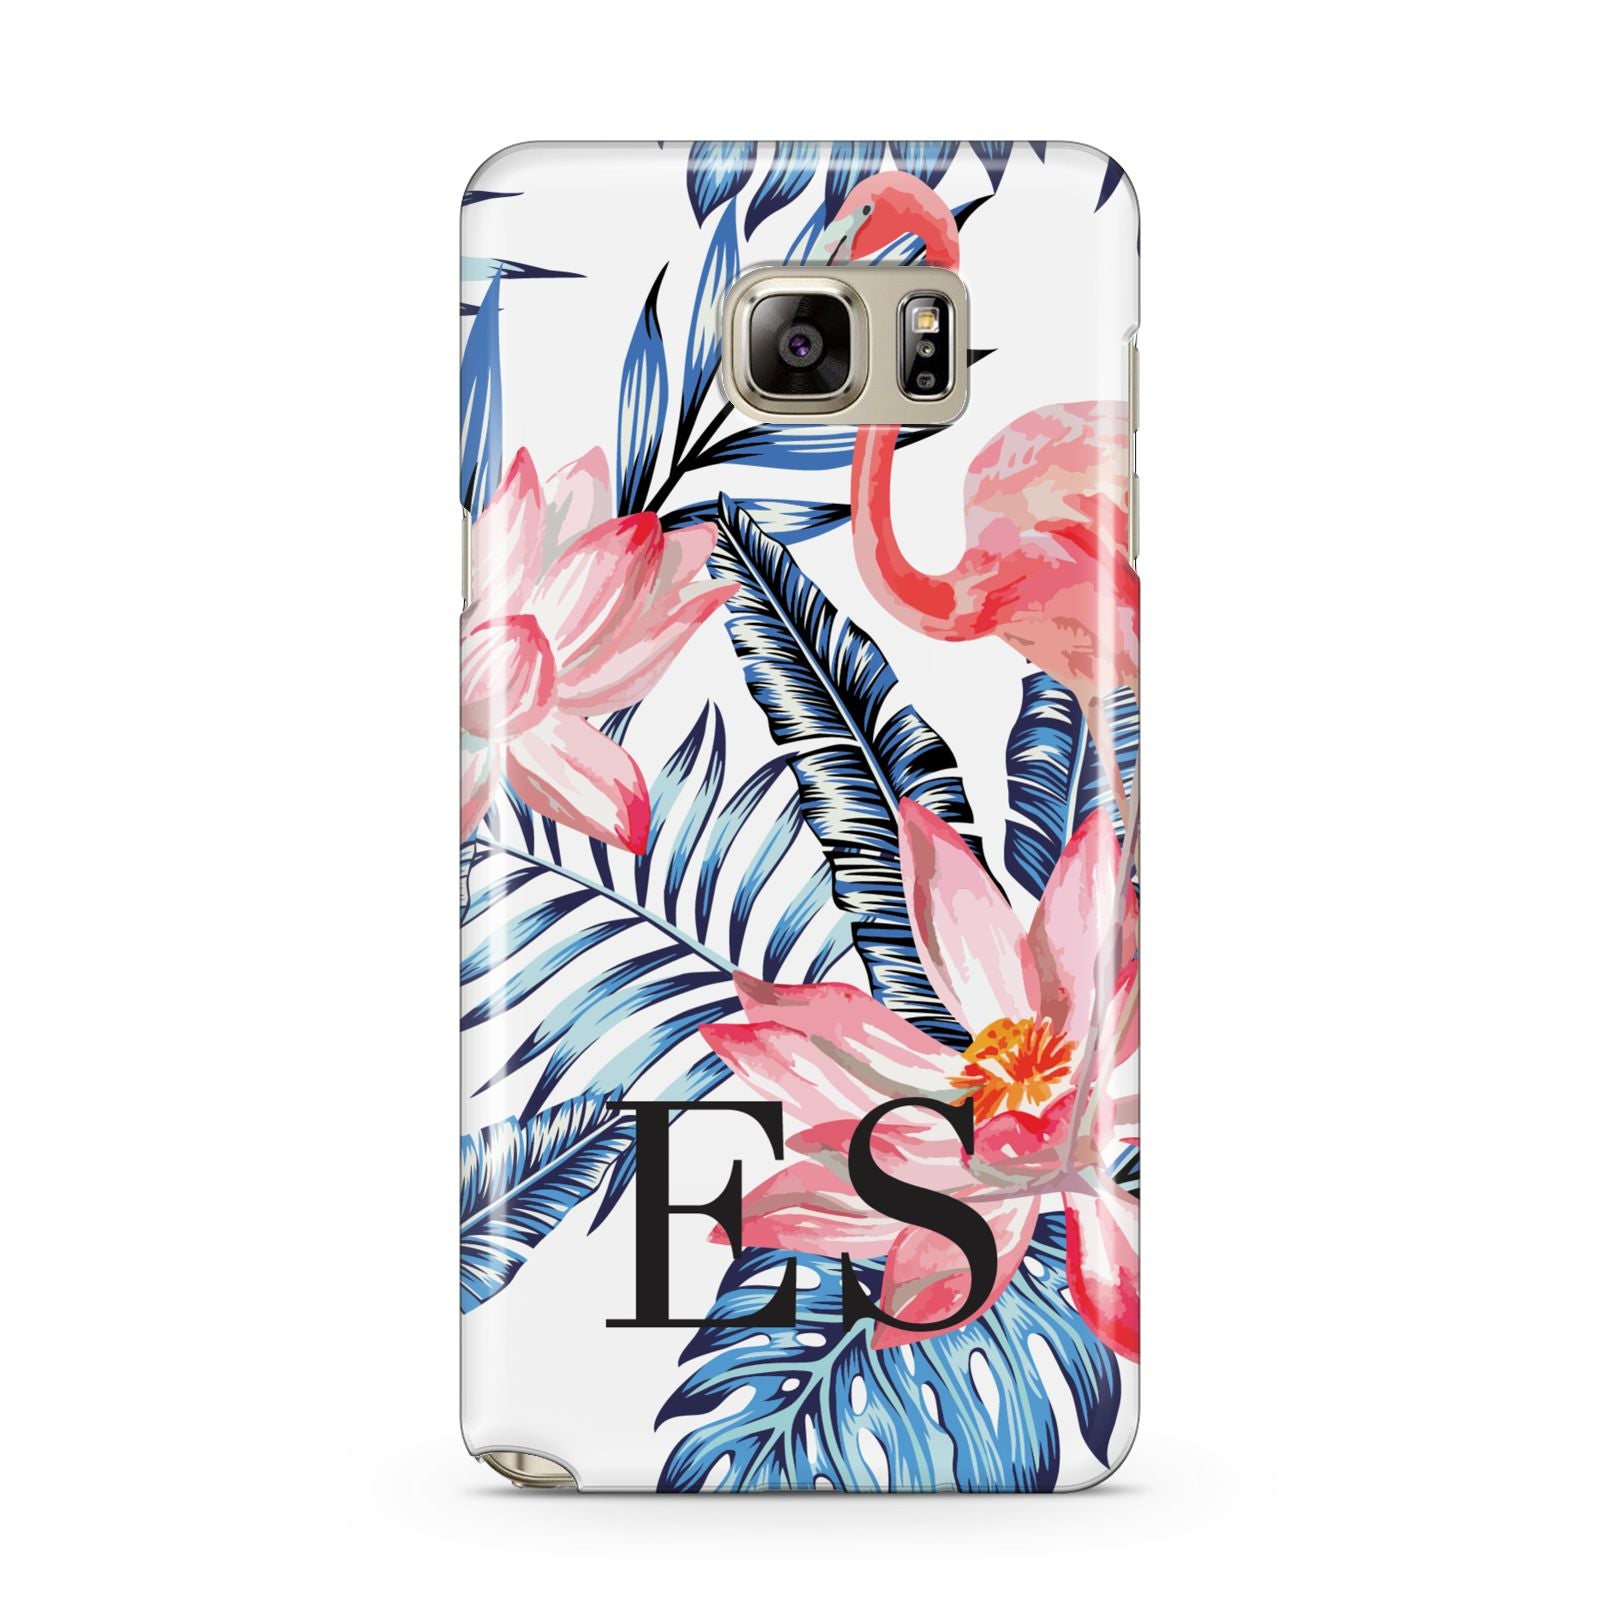 Blue Leaves Pink Flamingos Samsung Galaxy Note 5 Case